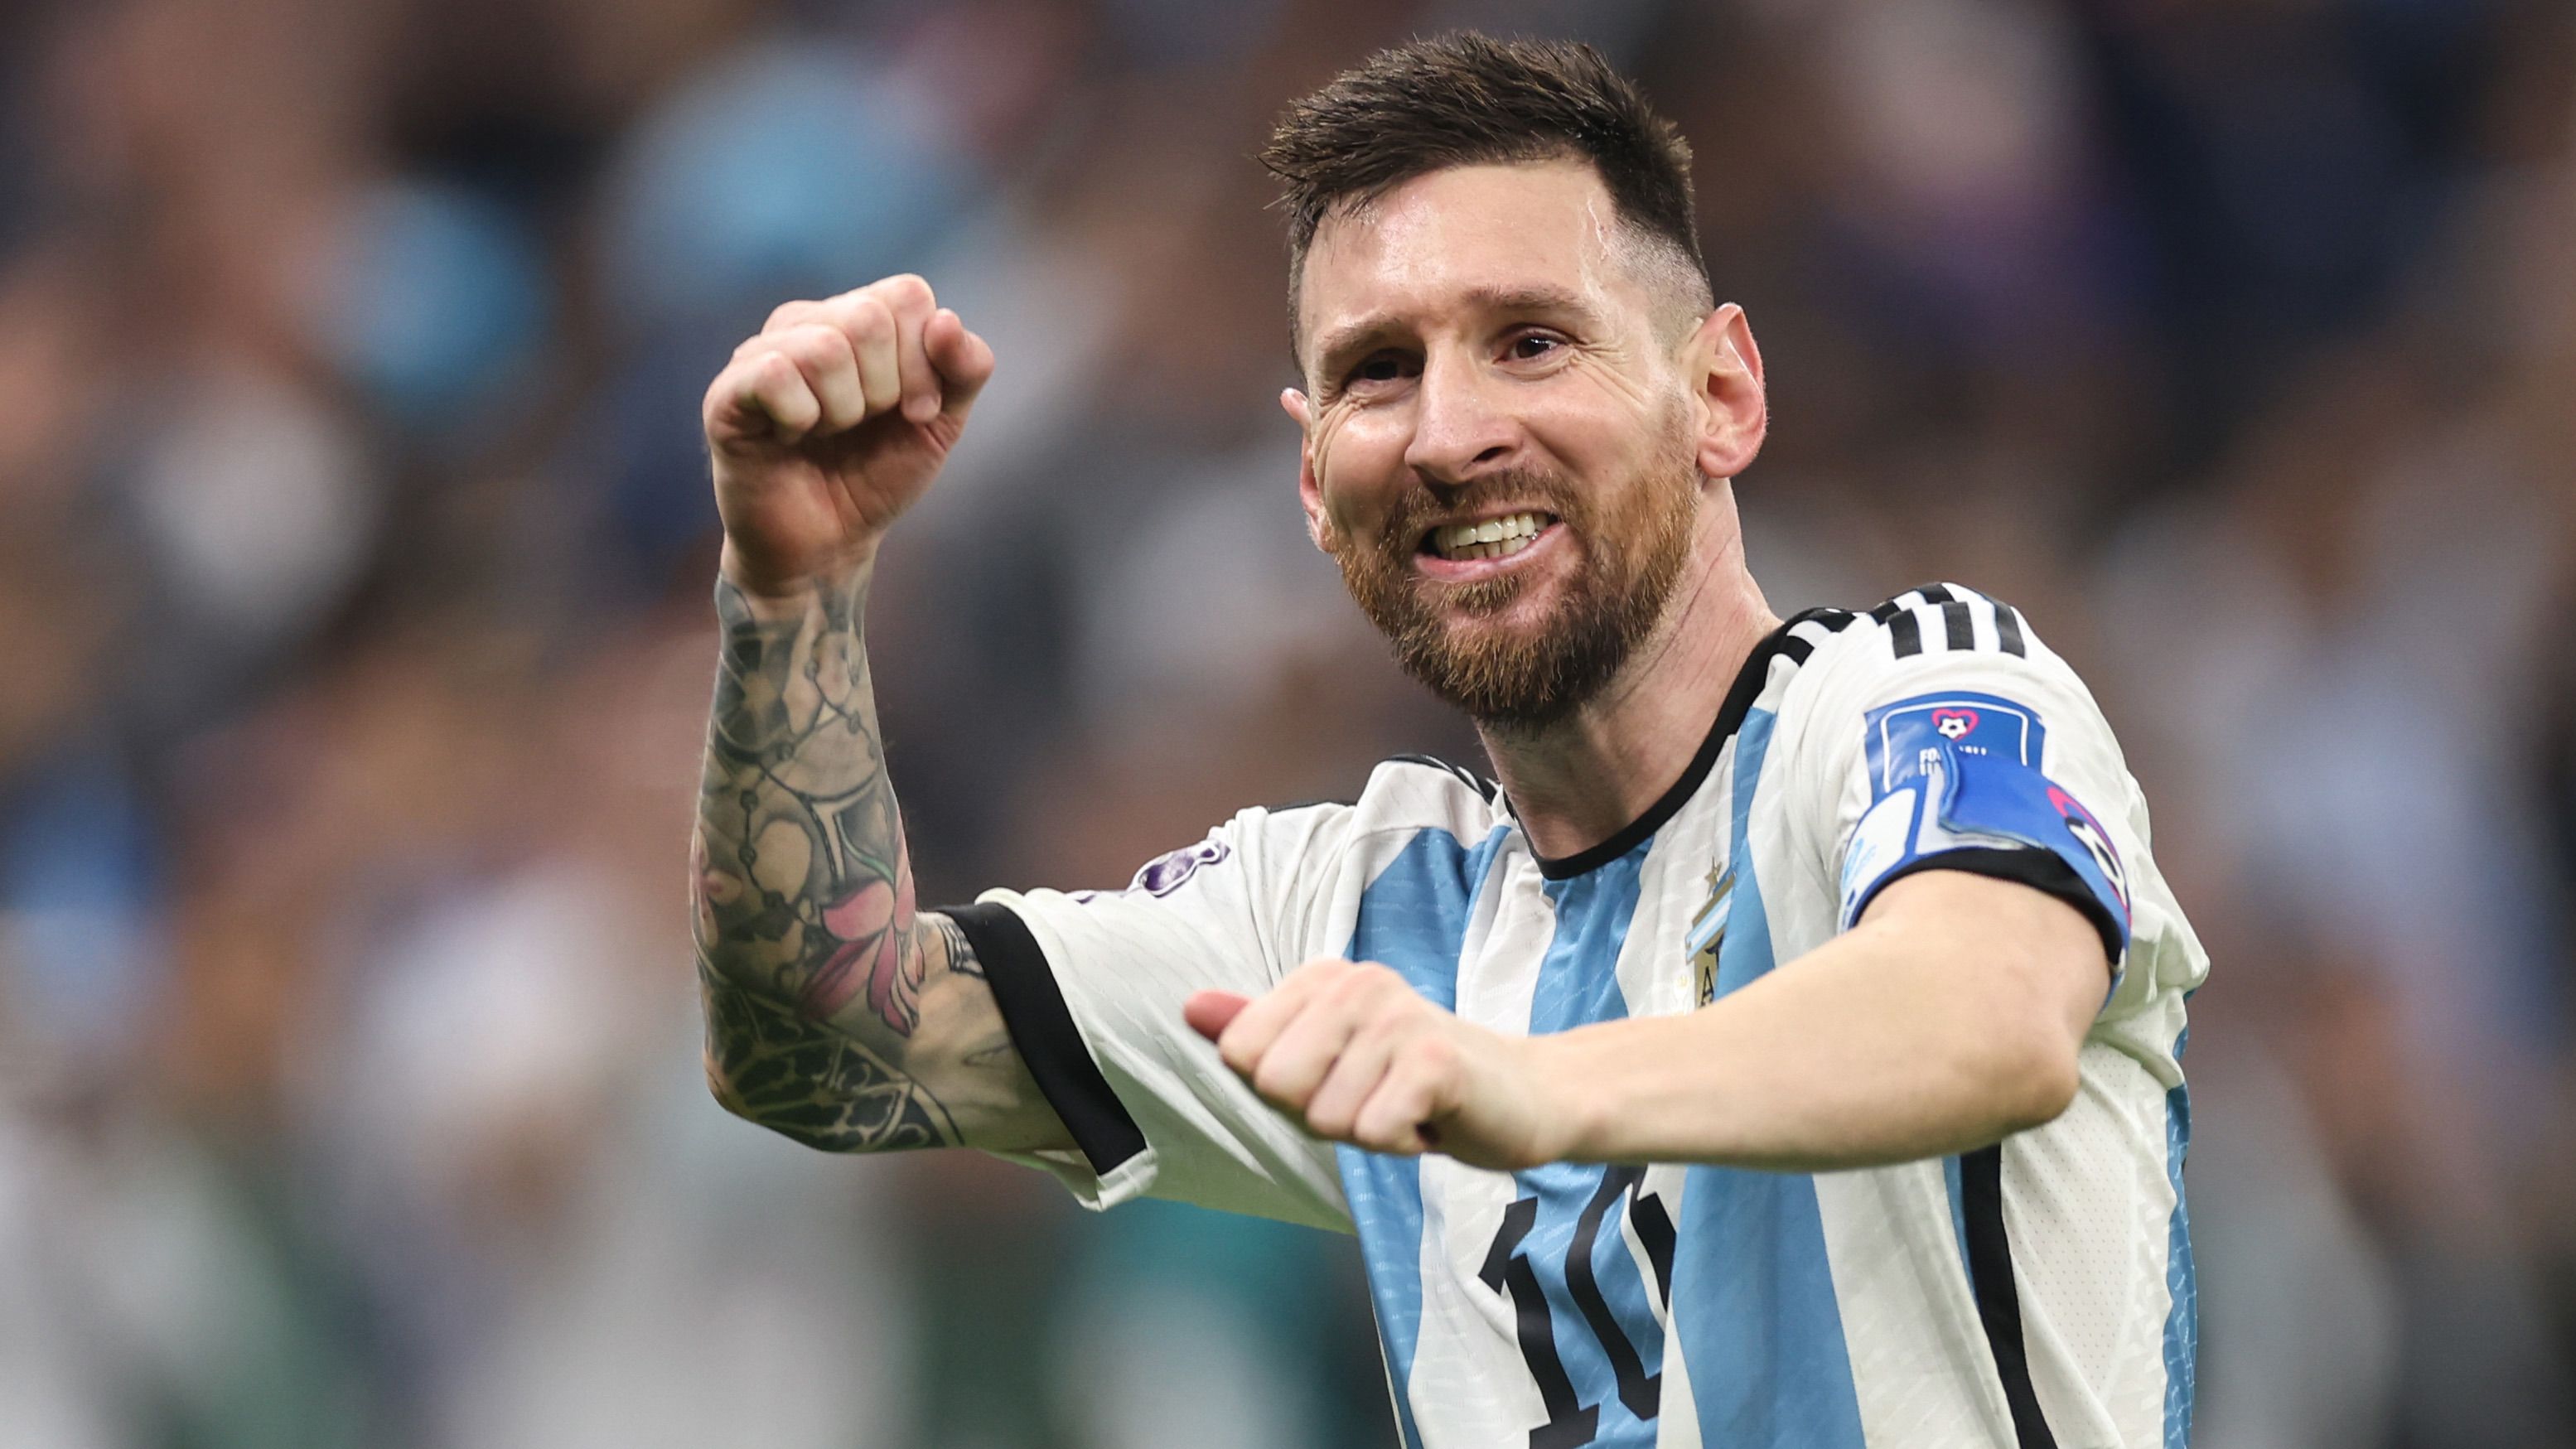 Lionel Messi of Argentina celebrates after scoring a goal to make it 3-2 during the FIFA World Cup Qatar 2022 Final match between Argentina and France at Lusail Stadium on December 18, 2022 in Lusail City, Qatar. (Photo by Matthew Ashton - AMA/Getty Images)